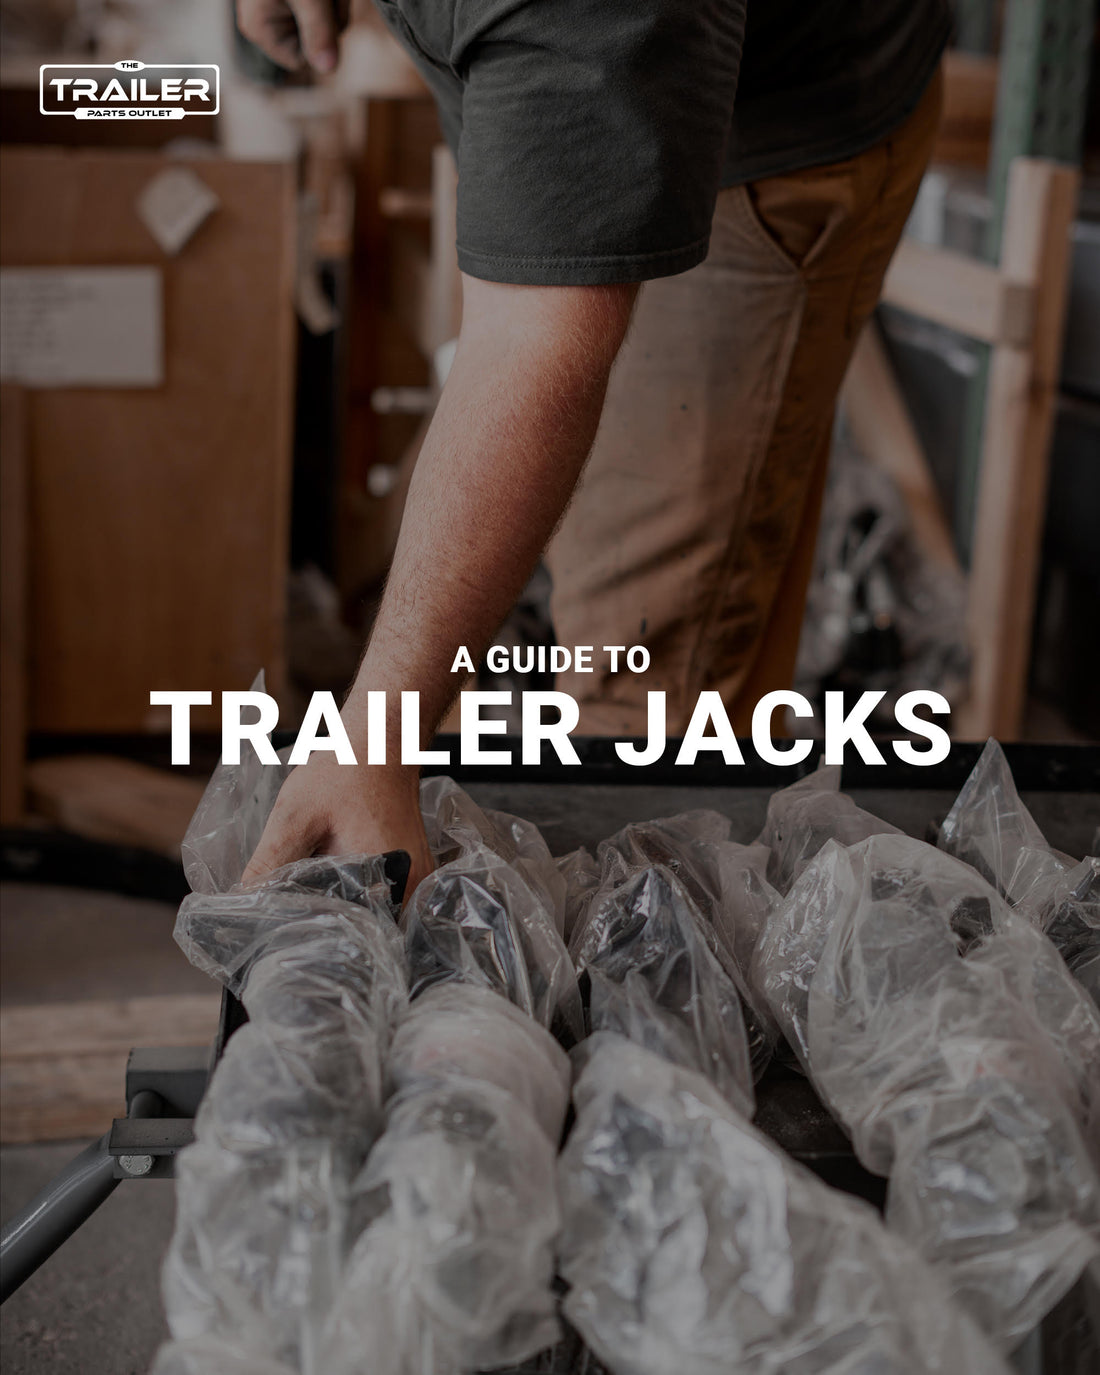 A Guide to Trailer Jacks from The Trailer Parts Outlet